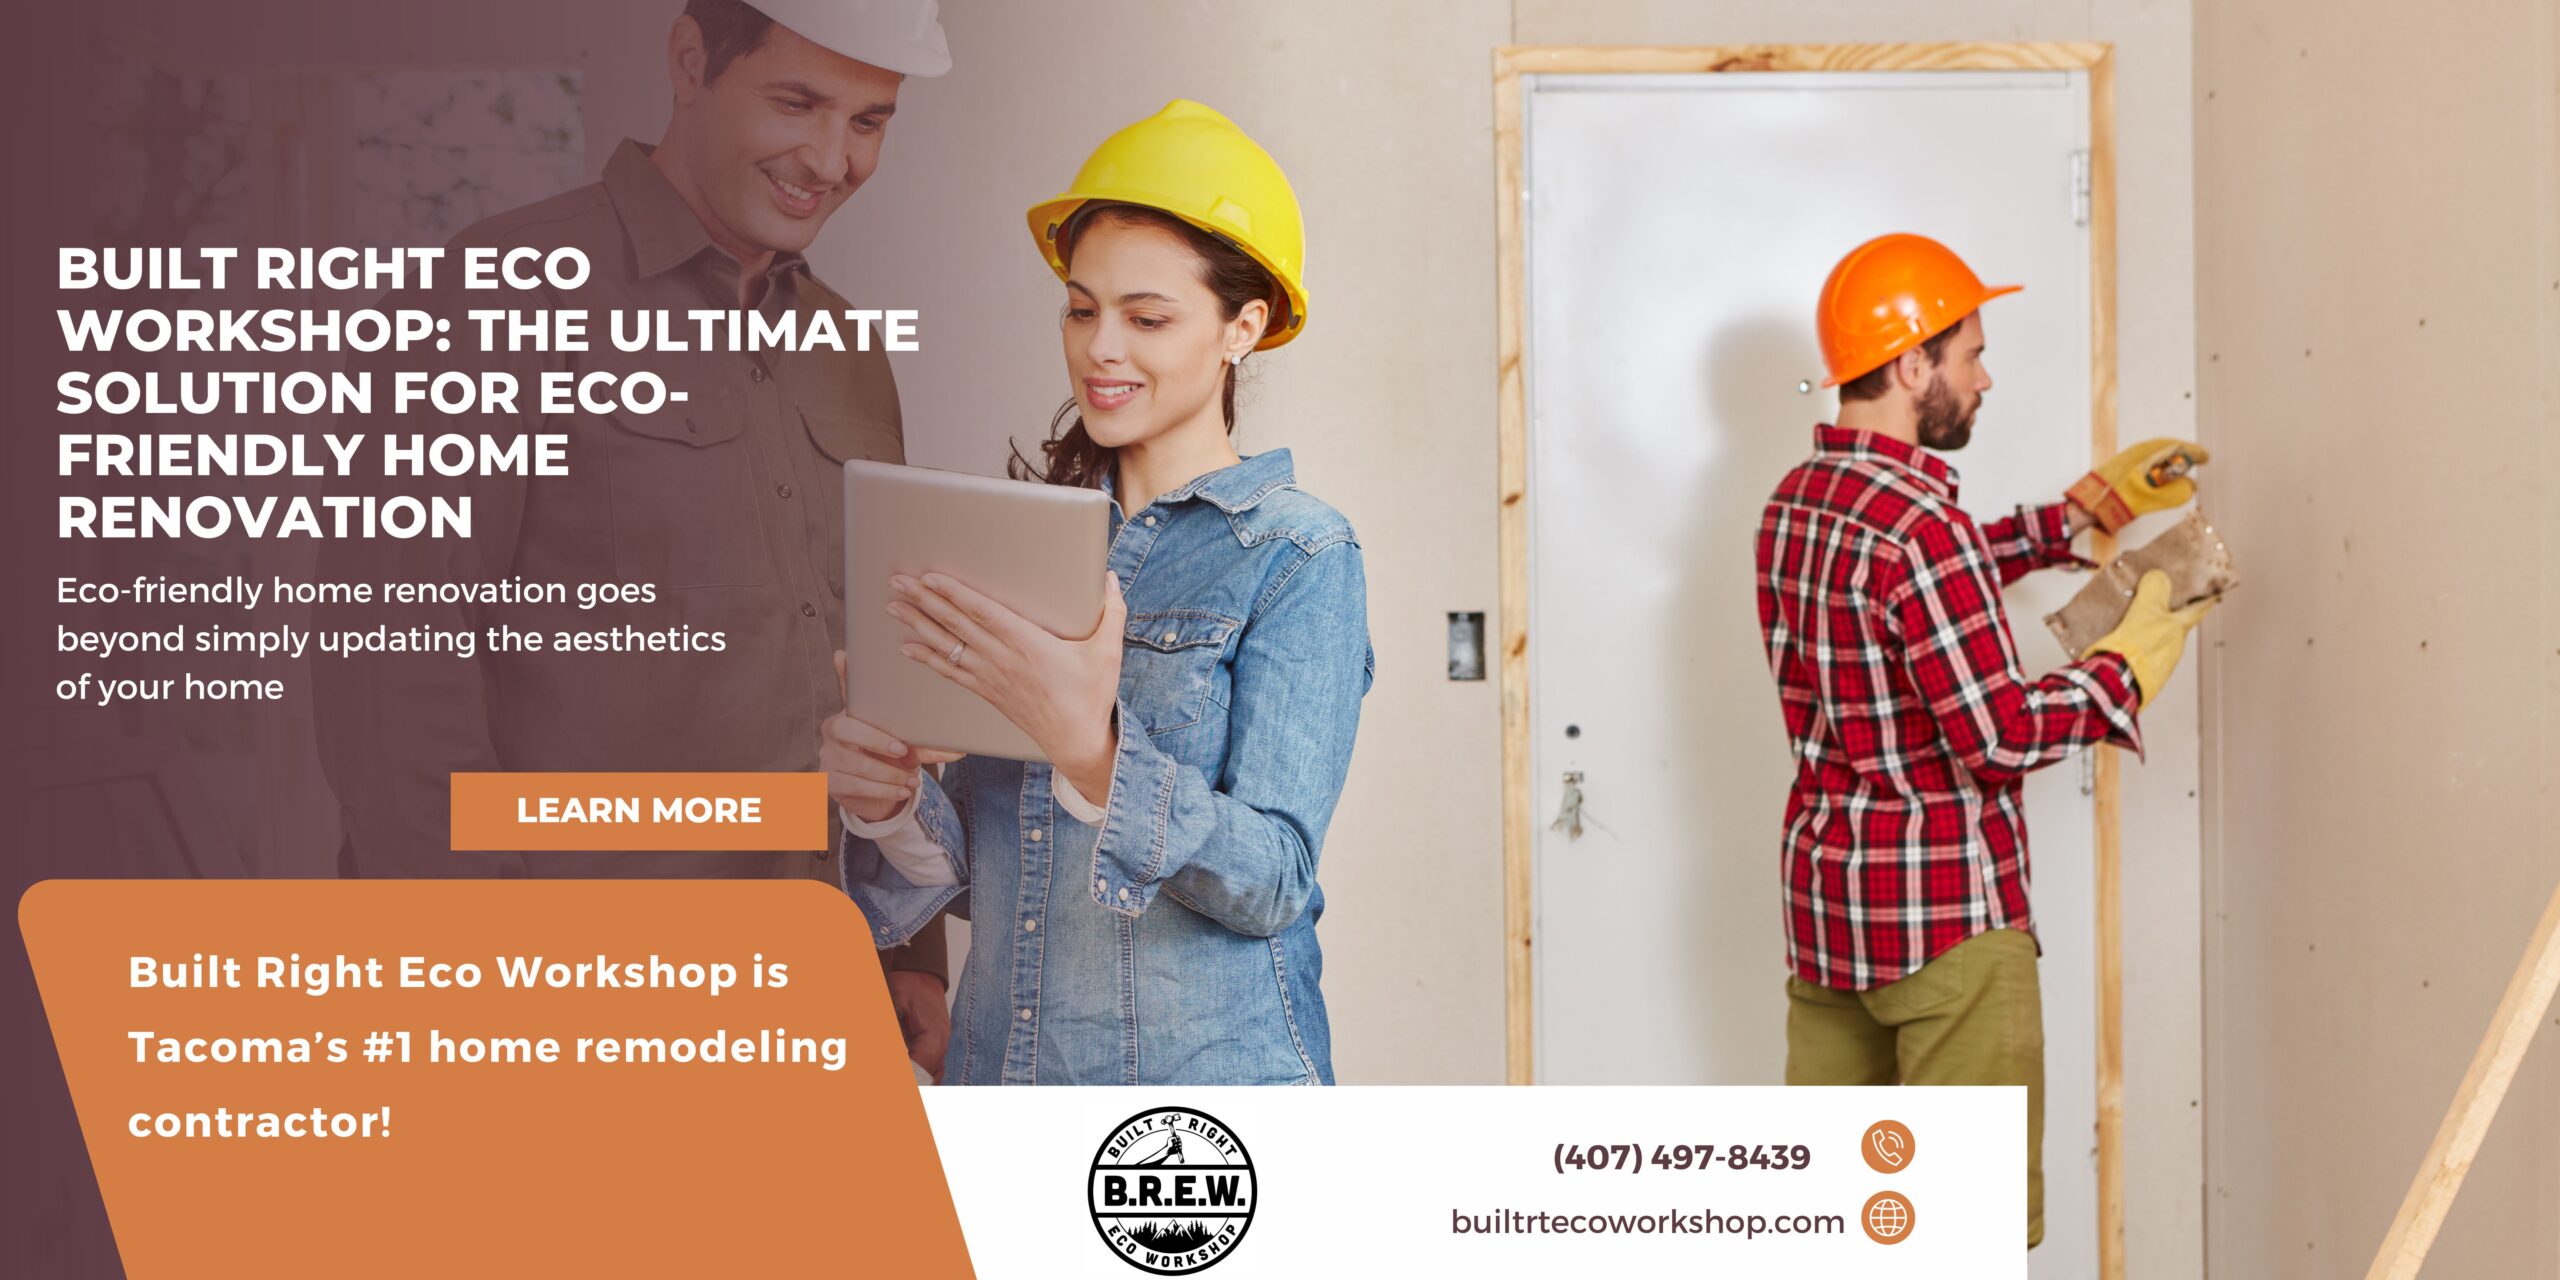 Built Right Eco Workshop: The Ultimate Solution for Eco-friendly Home Renovation